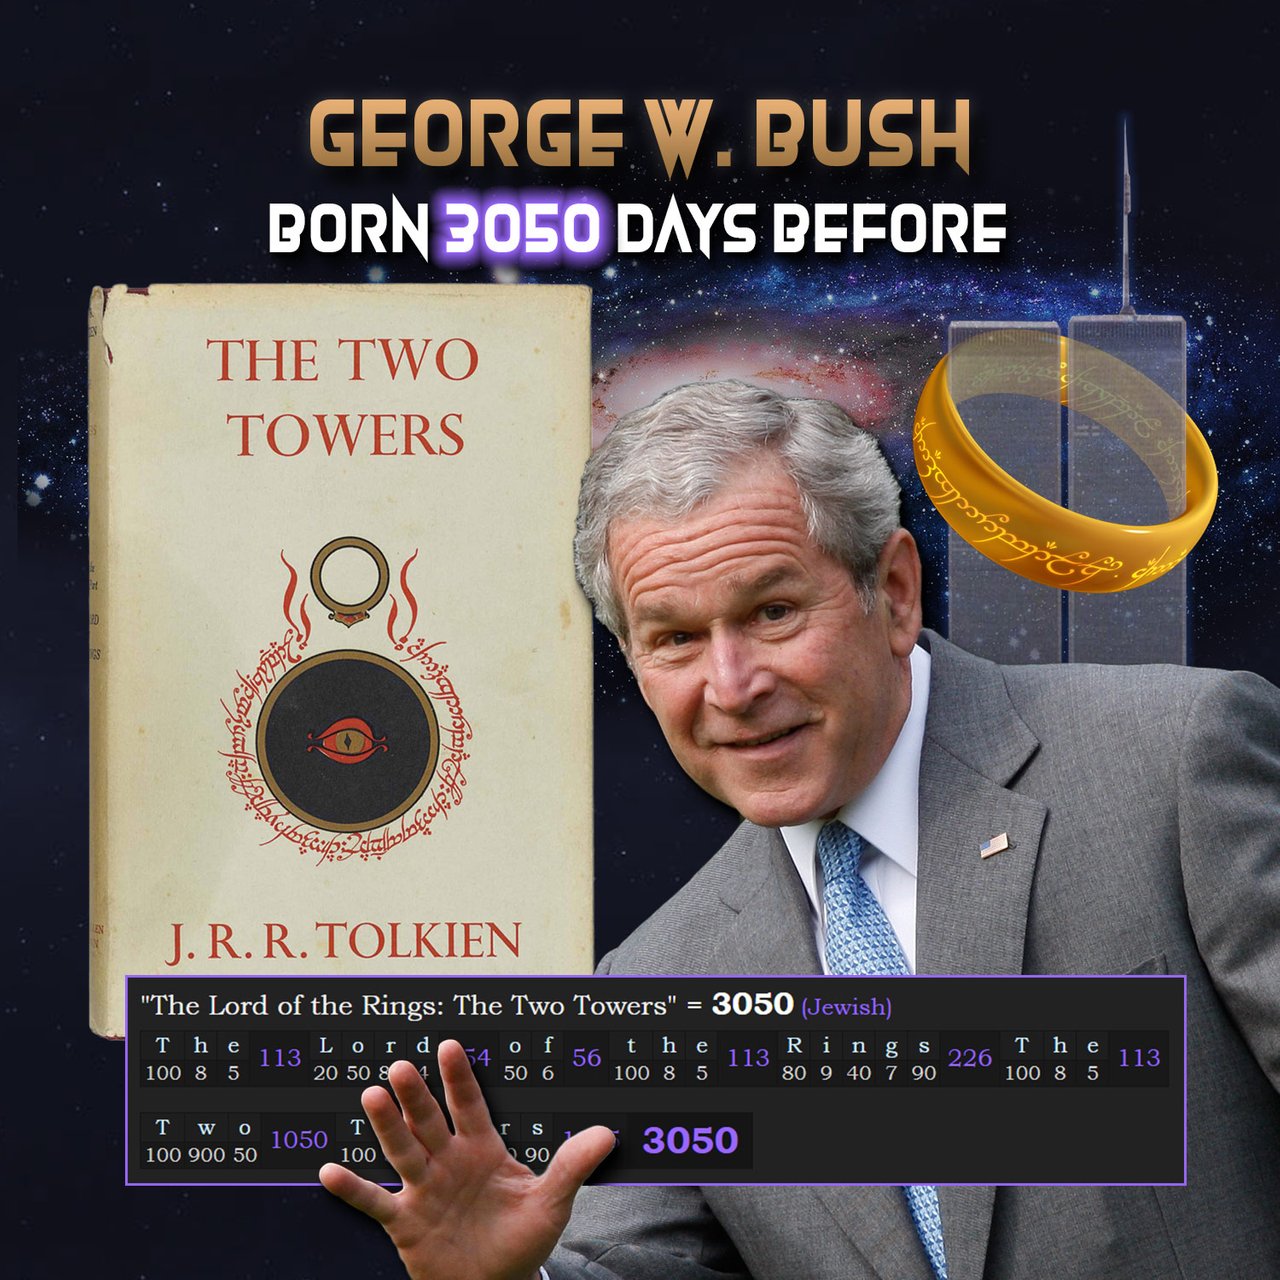 The Lord of the Rings: The Two Towers & George W Bush | PeakD